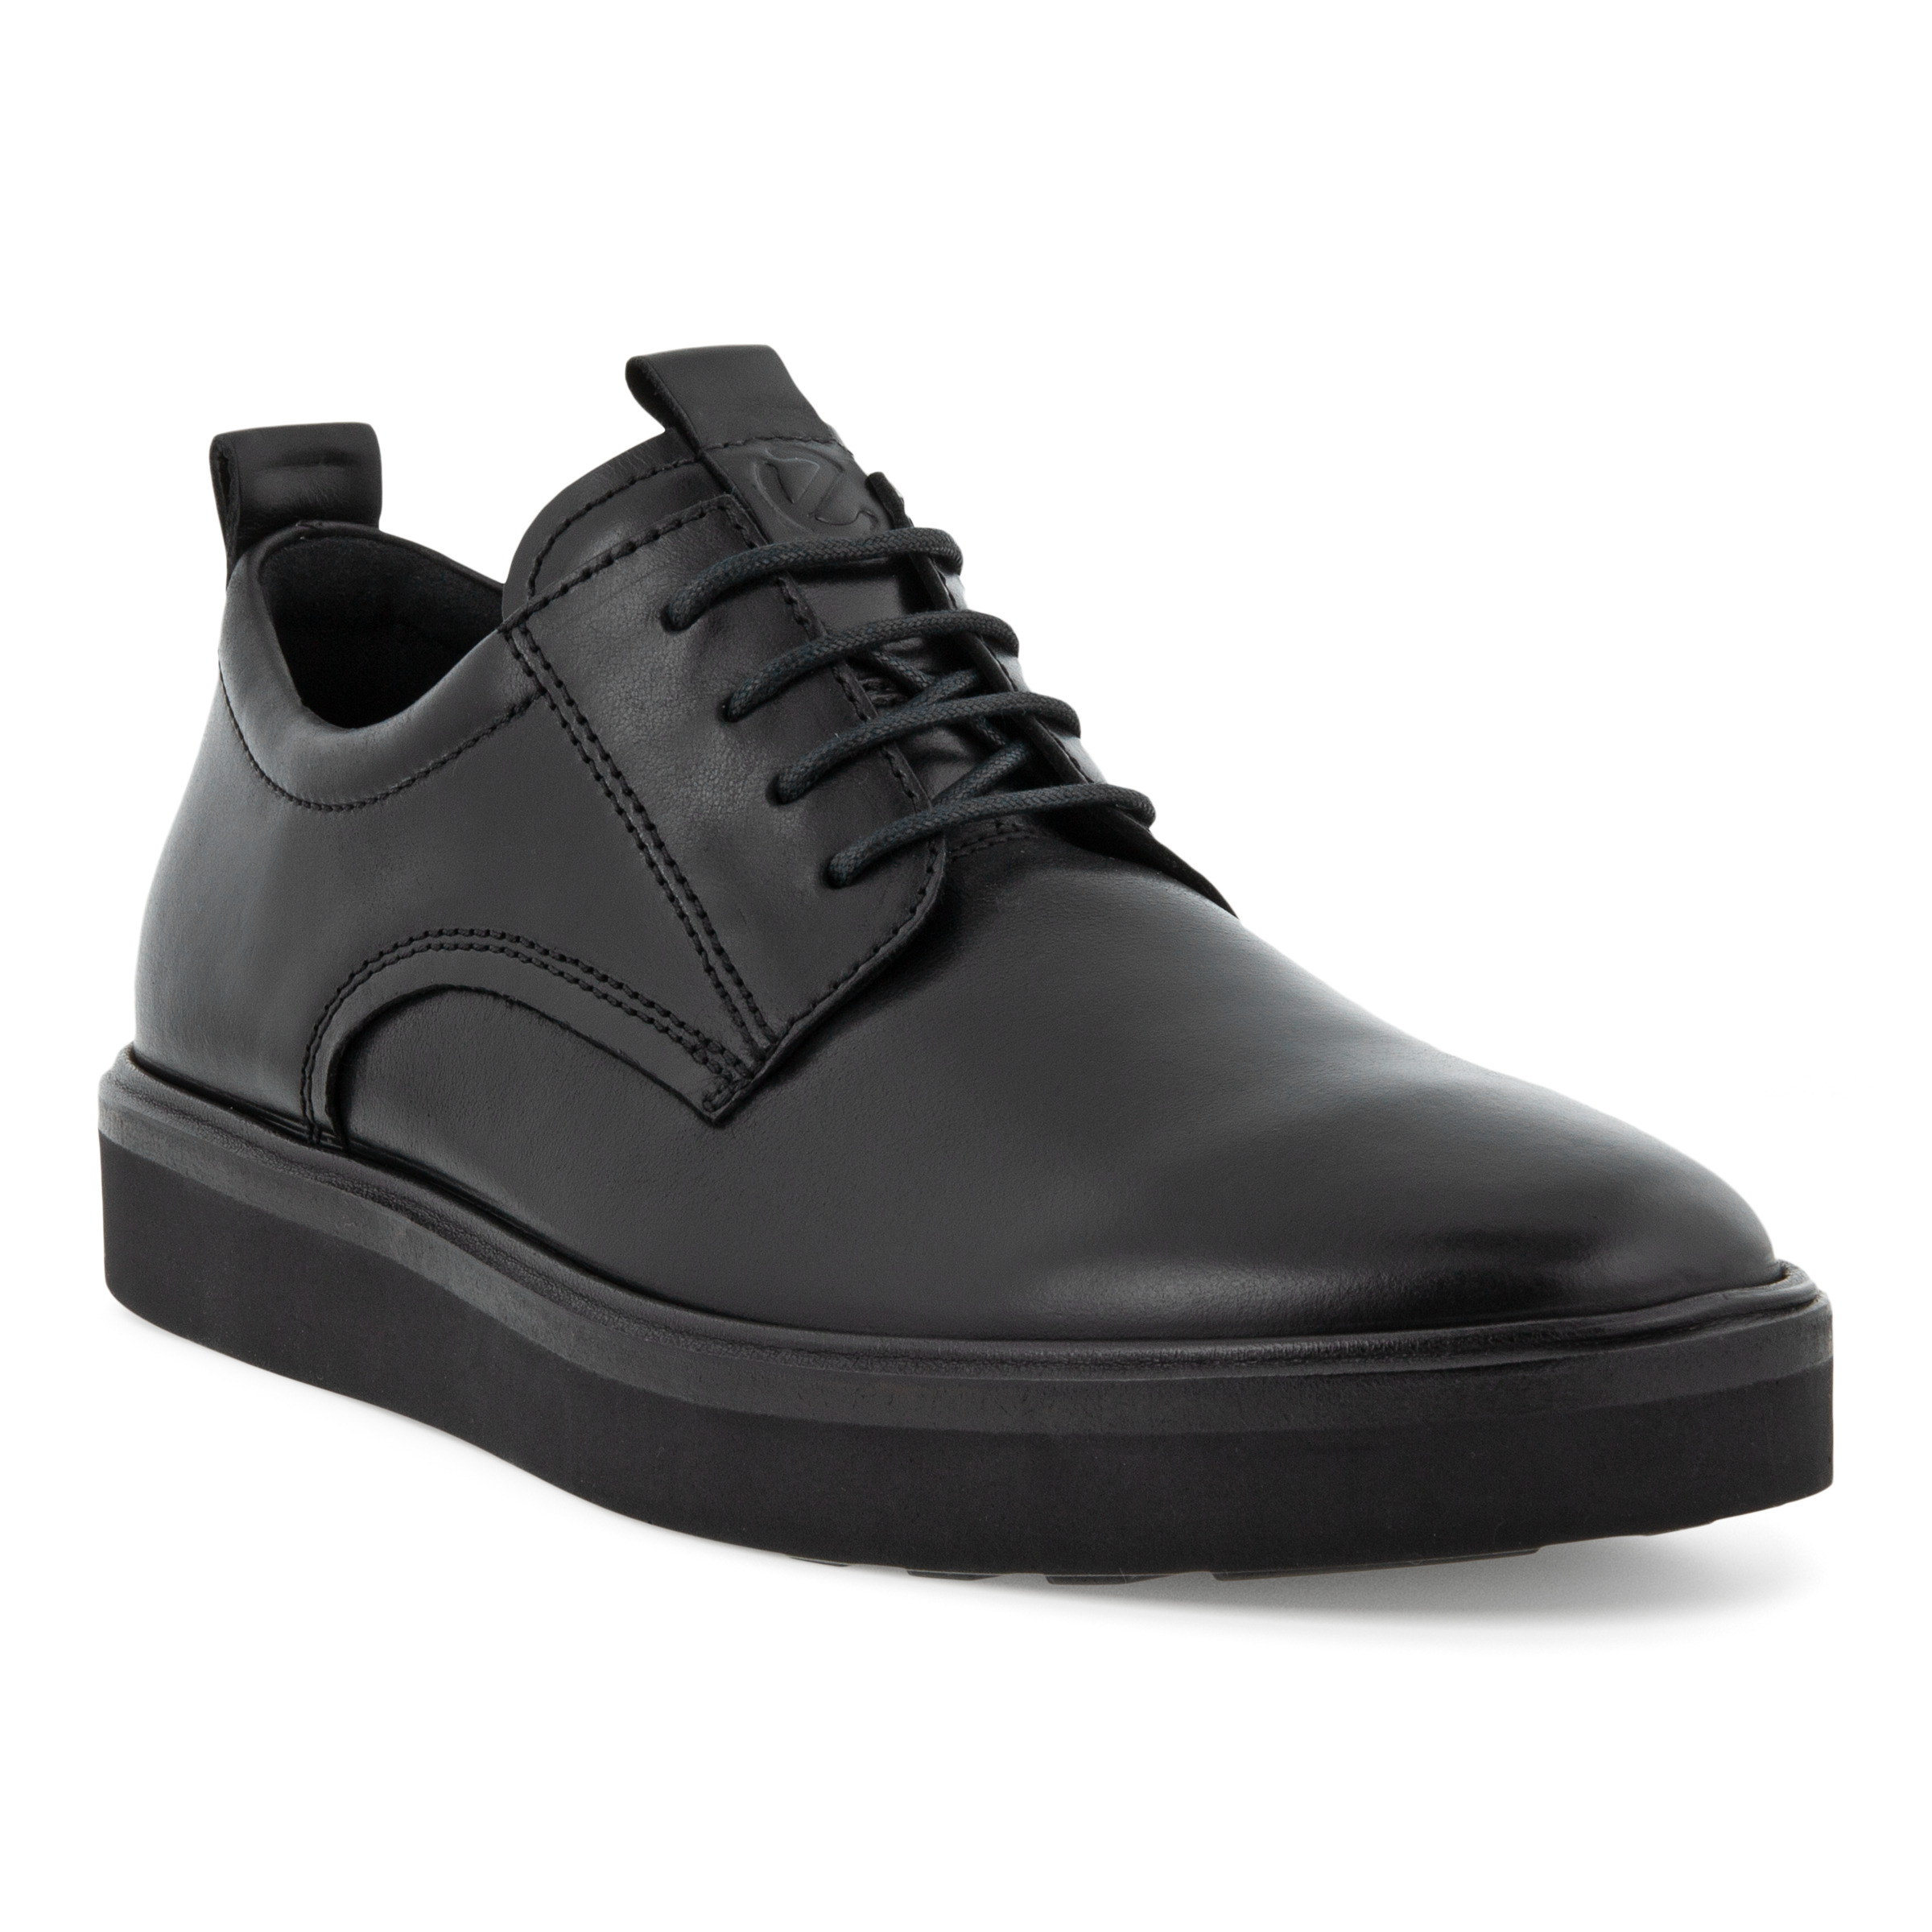 best price on ecco mens shoes